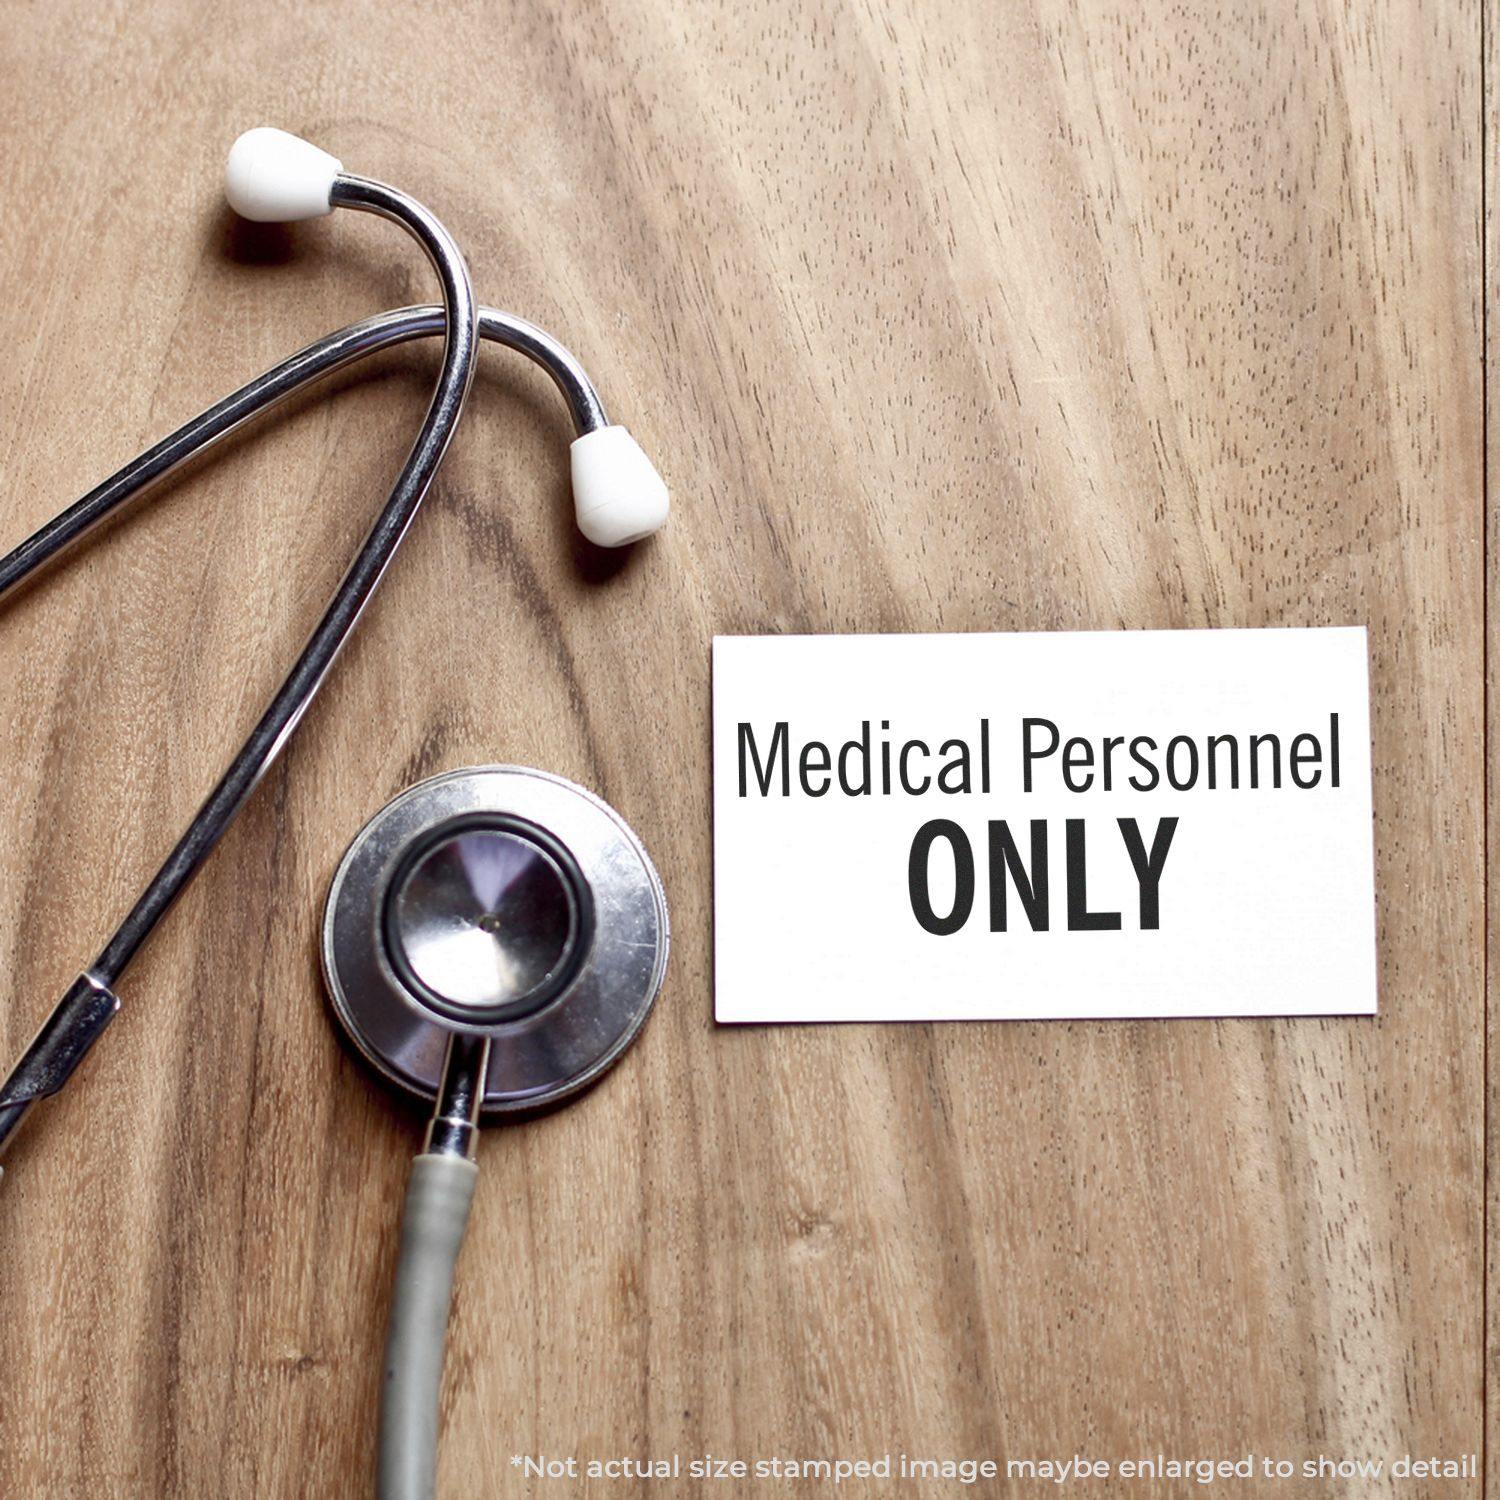 A stock office rubber stamp with a stamped image showing how the text "Medical Personnel ONLY" in a large font is displayed after stamping.